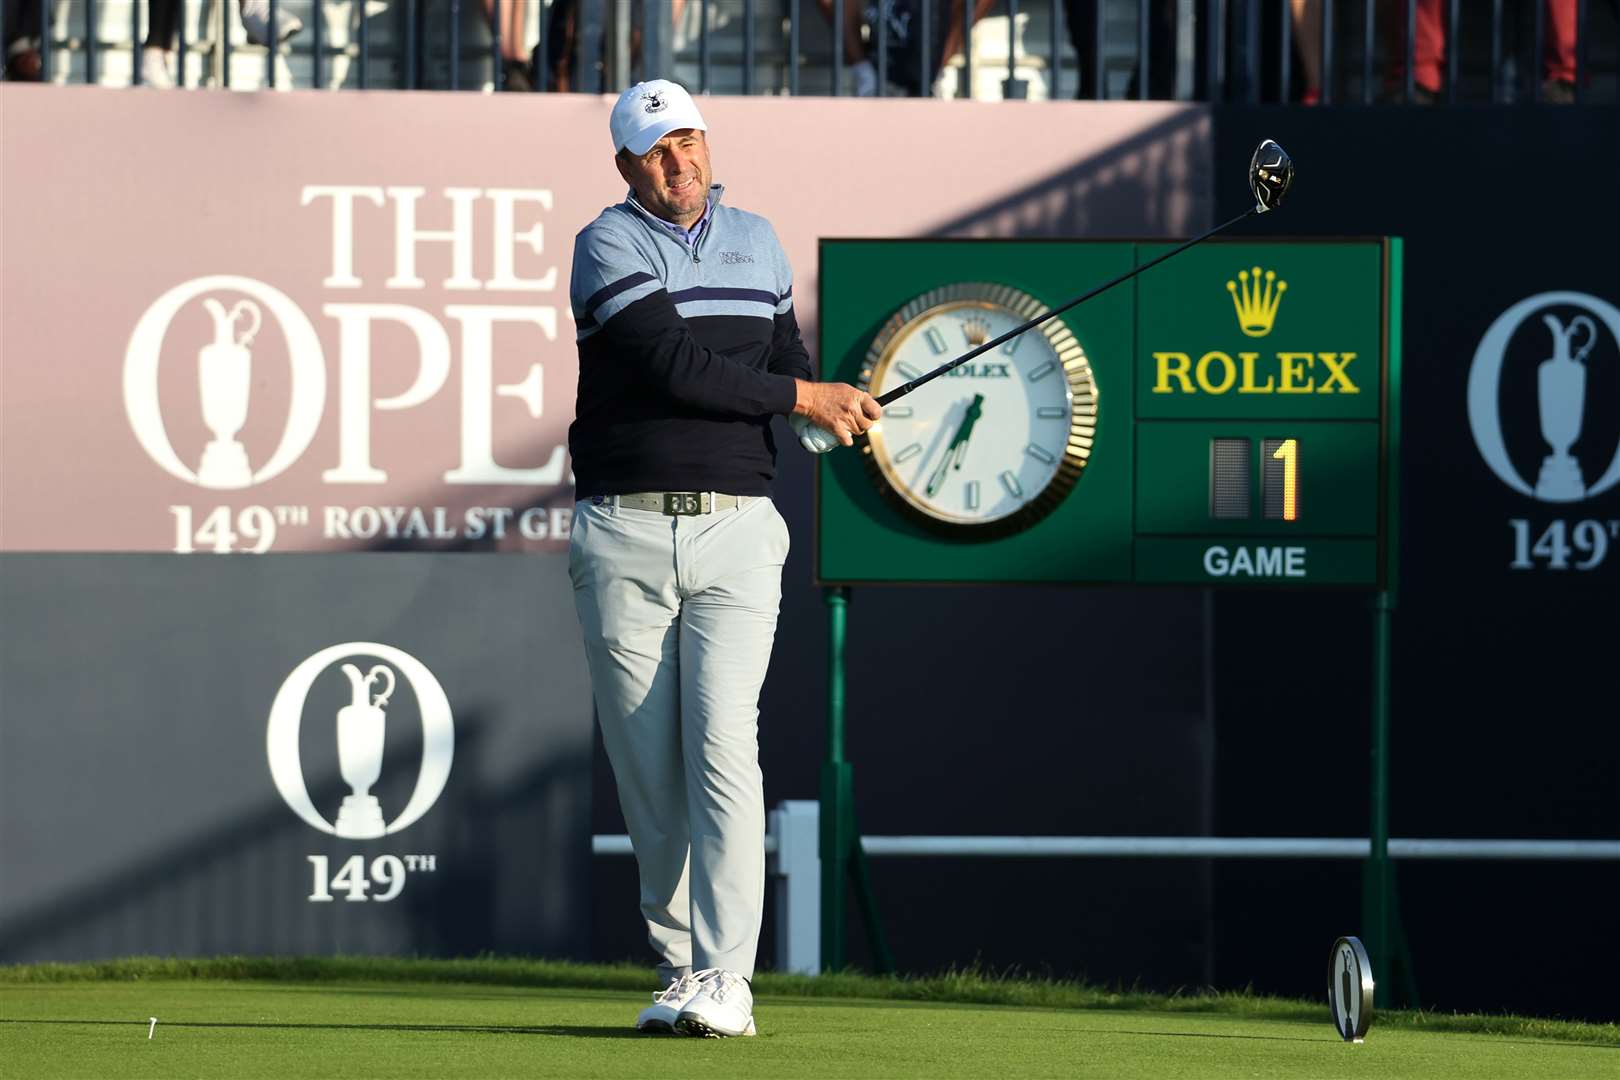 Richard Bland tees off on the first hole at The Open today, when the competition began in full. Picture: The R&A